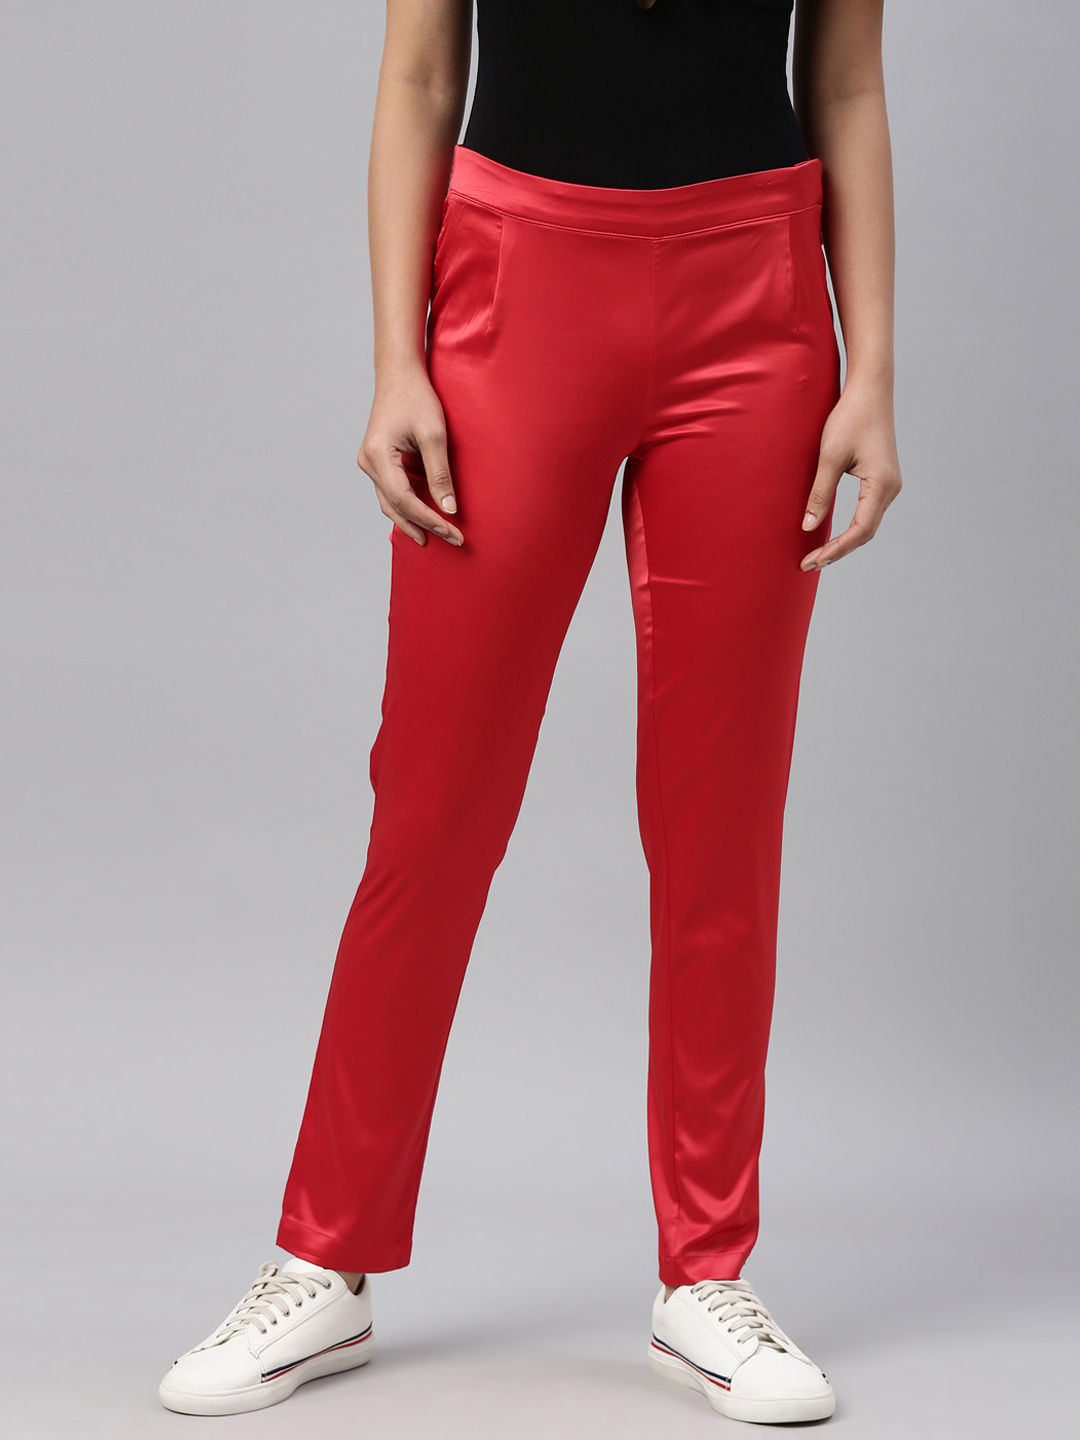 Partly Cotton Low Waist Skinny Trousers  Red or Grey  Just 7